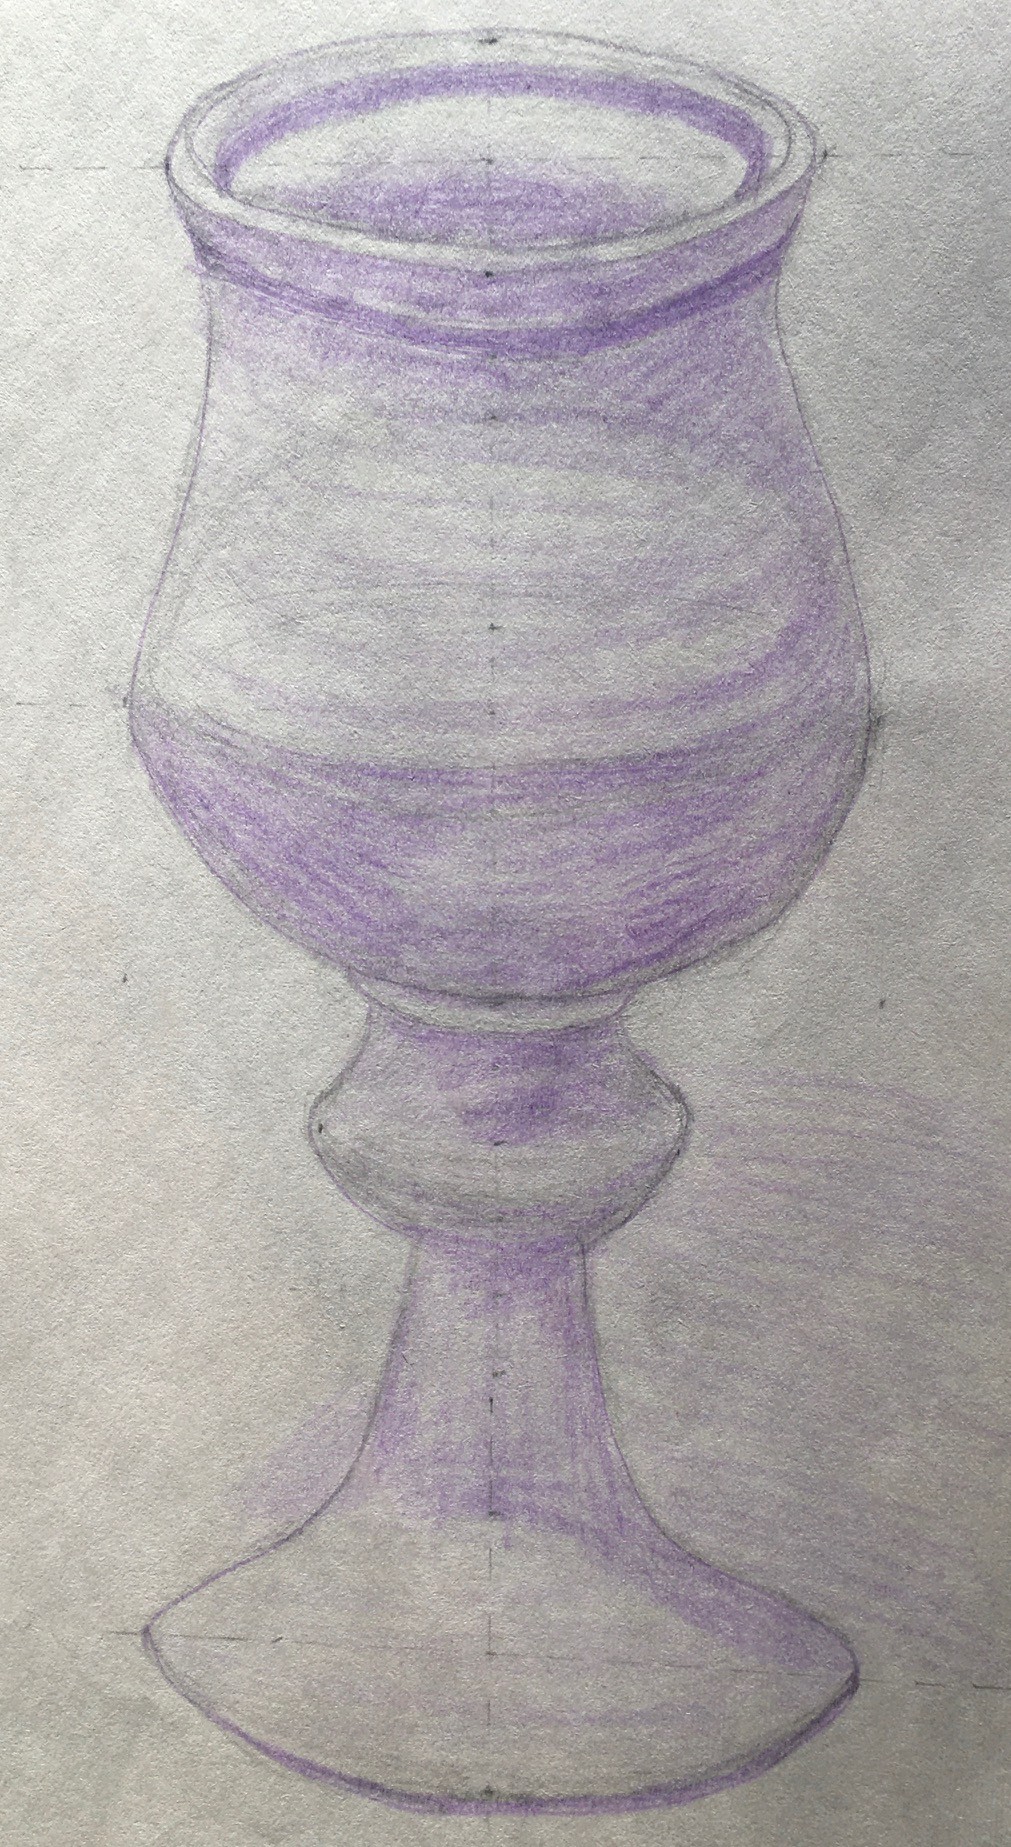 Goblet, 2018
Pencil and Colored Pencil on Paper
6.5"W x 12.5"H, Walli White, artist